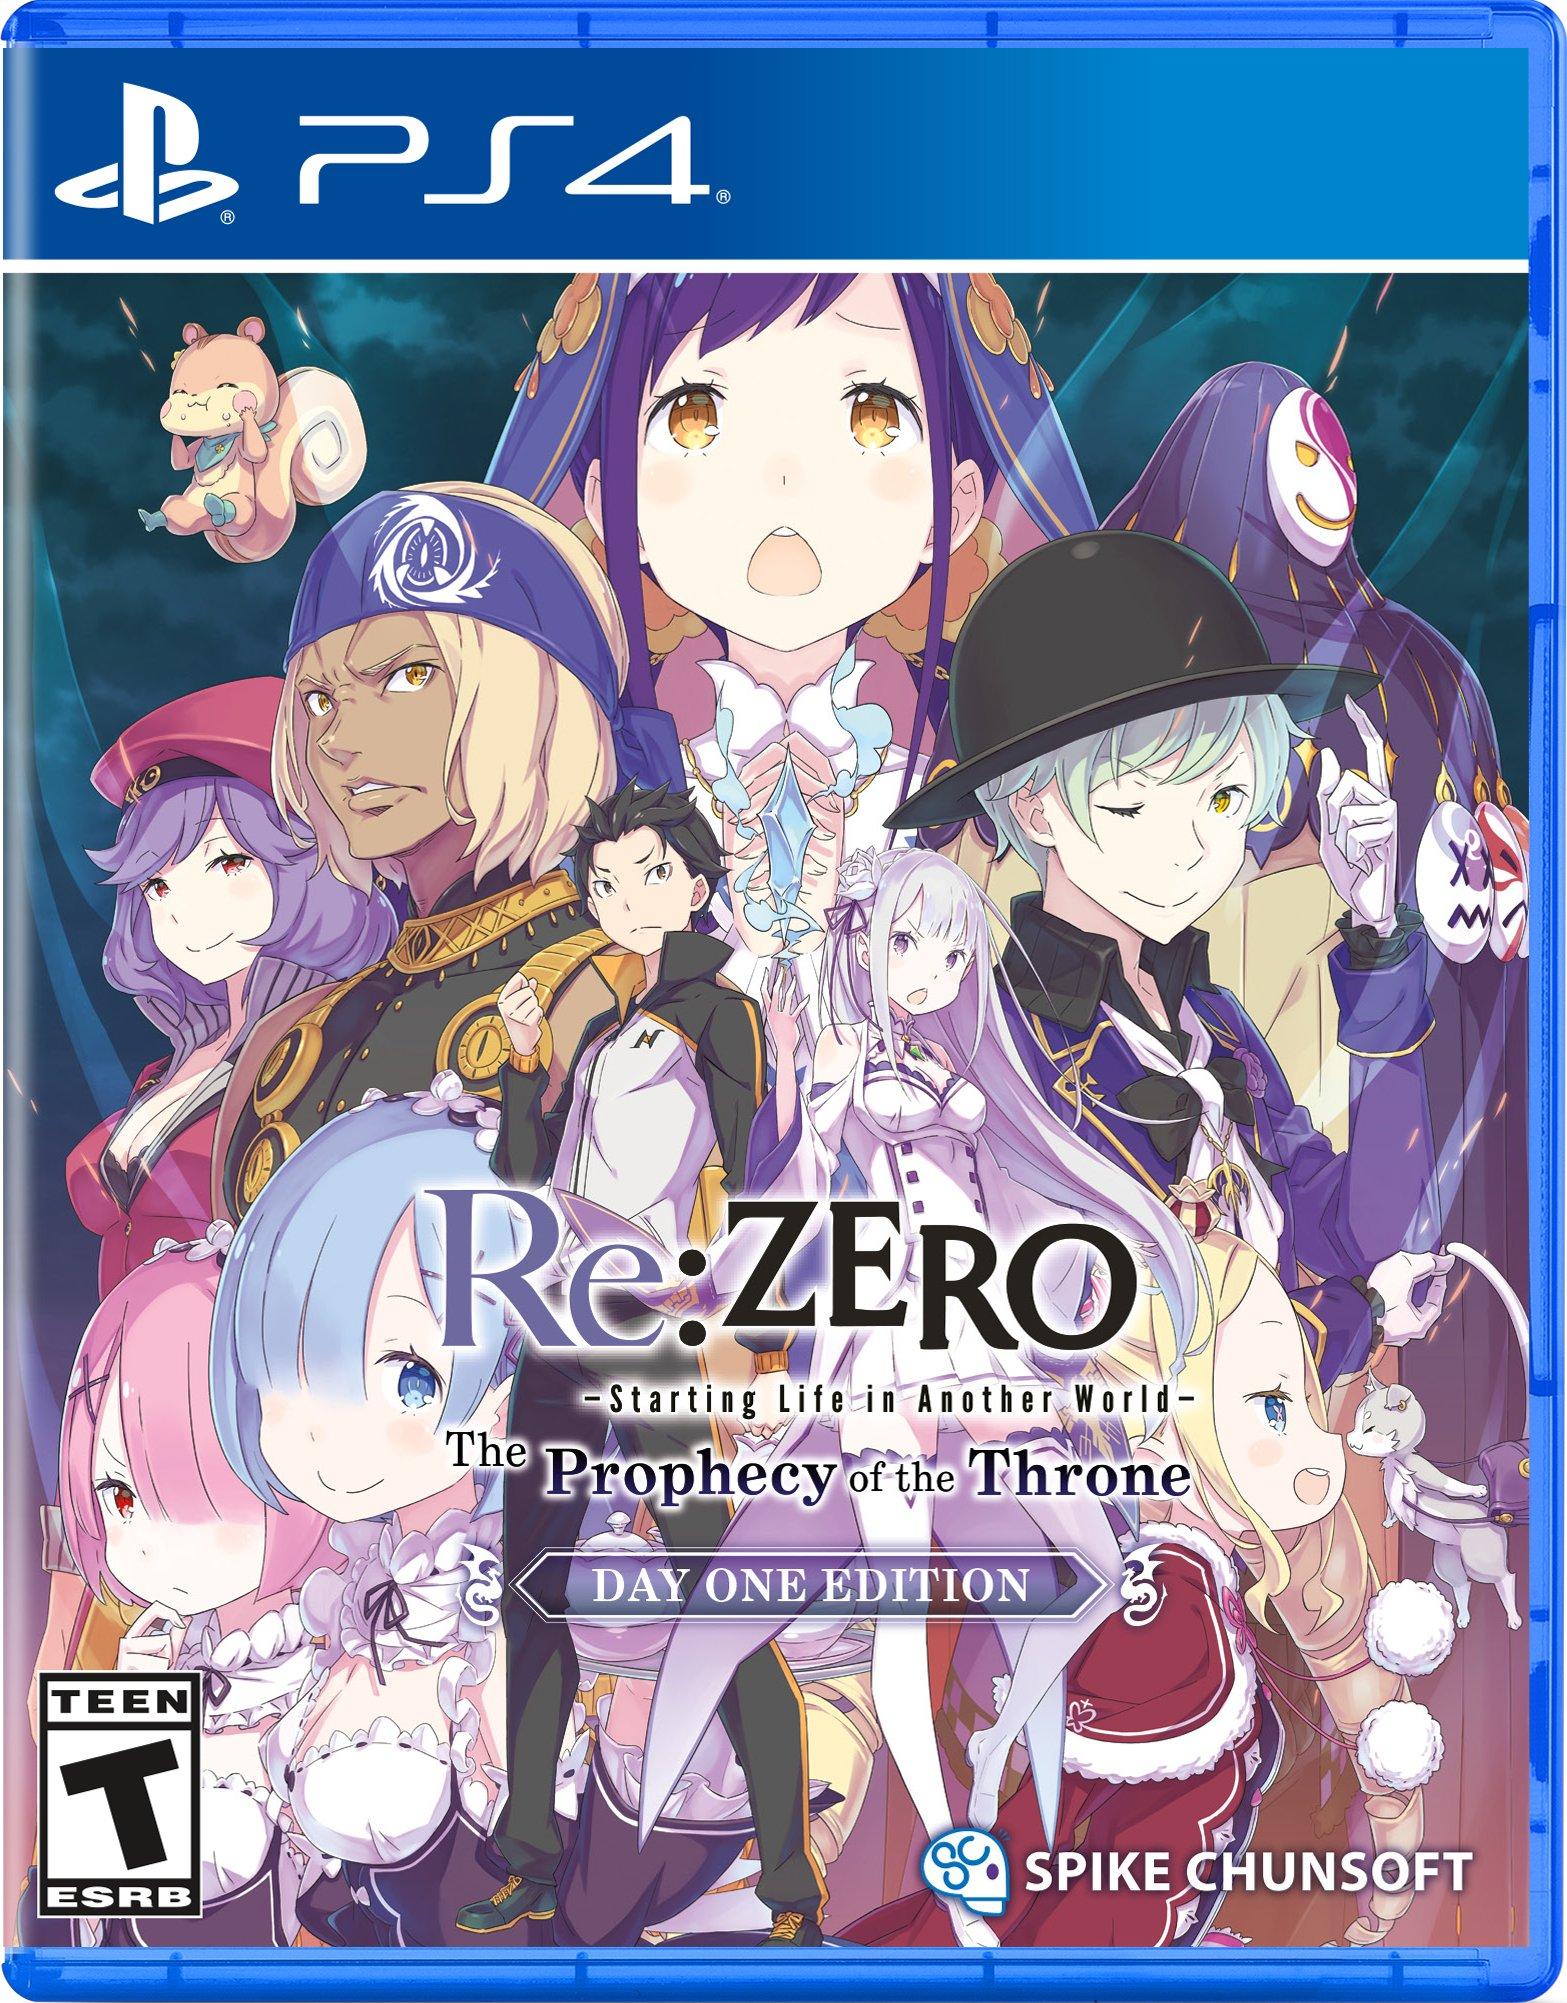 Re:ZERO - The Prophecy of the Throne Day One